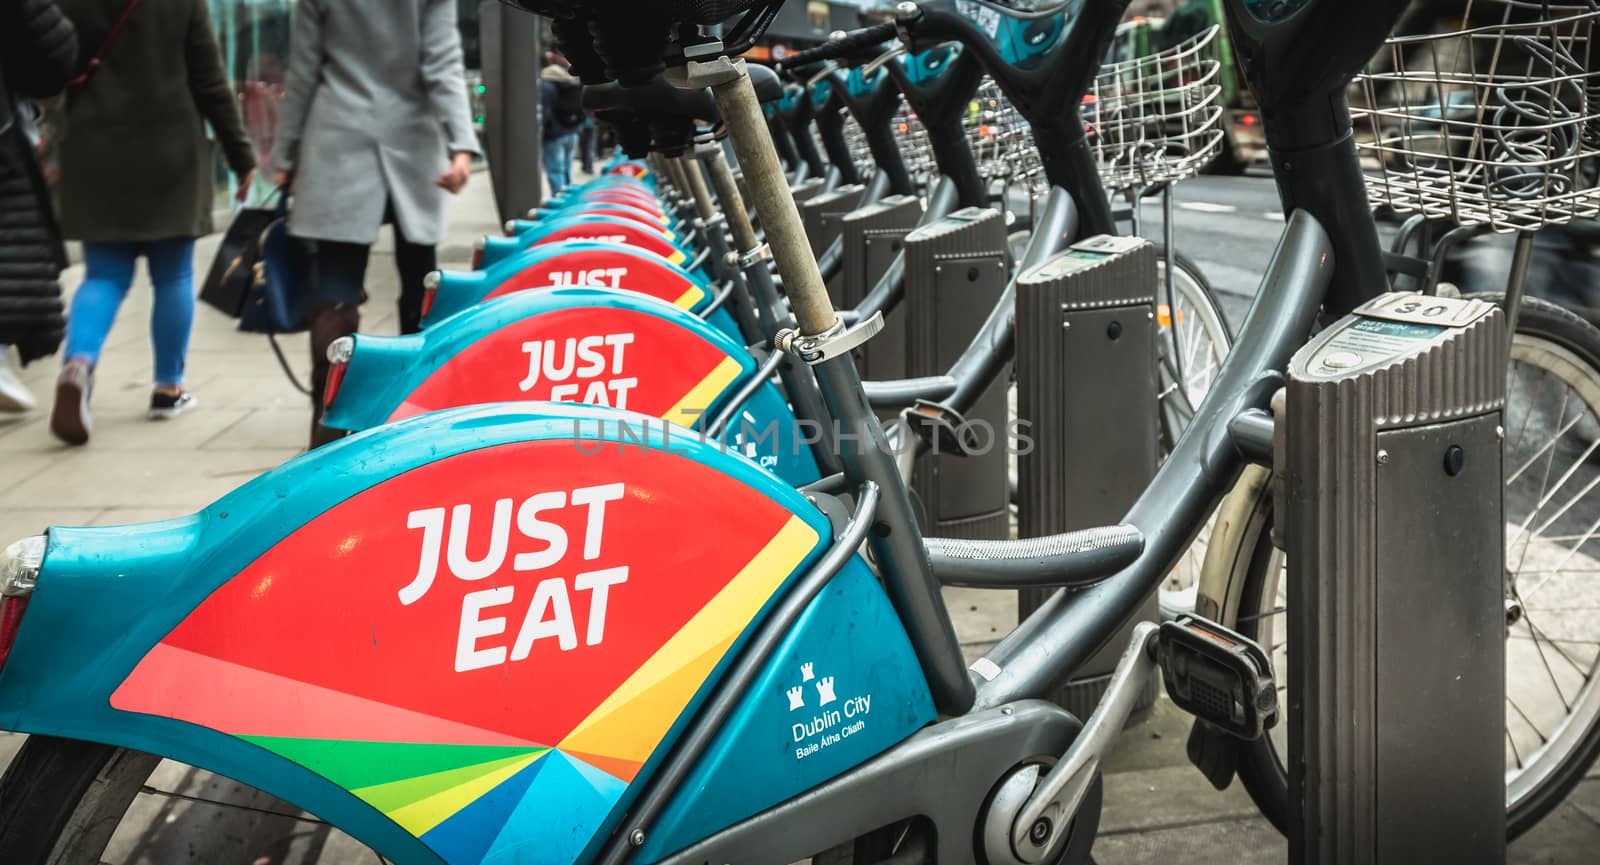  Detail of a shared public bike station Just Eat dublinbikes in  by AtlanticEUROSTOXX